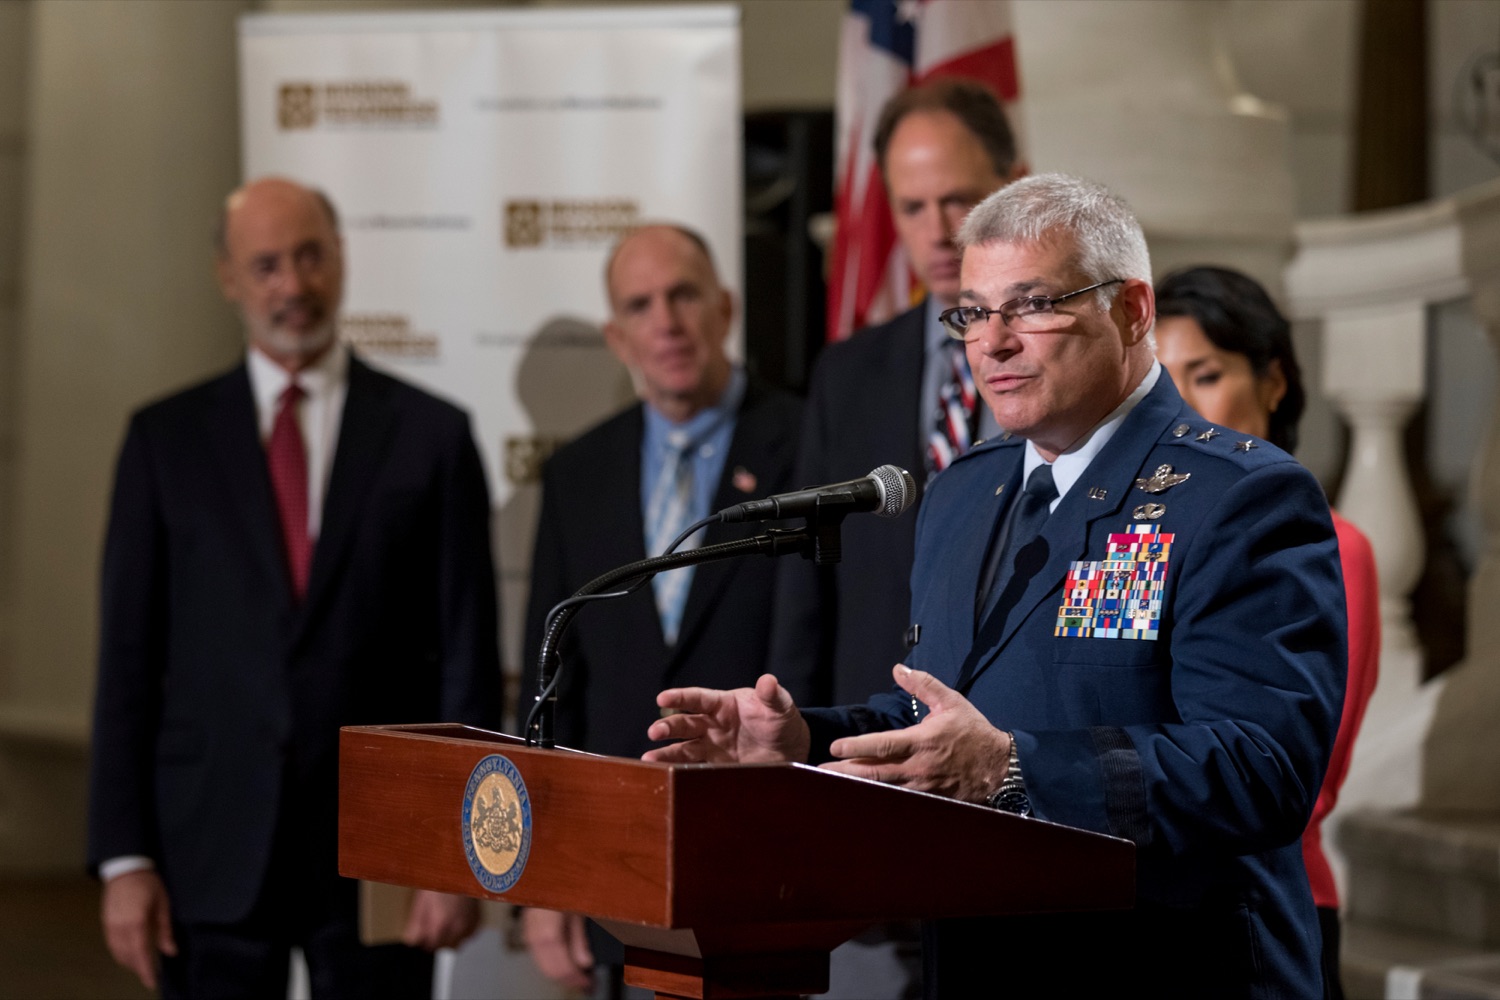 Maj. Gen. Anthony Carrelli, USAF and adjutant general of Pennsylvania, speaks during a press conference outlining how competition for qualified individuals among all employment sectors affects military recruiting efforts and warrants greater investment in our next generation inside the Capitol Rotunda on Tuesday, November 12, 2019.<br><a href="https://filesource.amperwave.net/commonwealthofpa/photo/17588_GOV_Mission_Readiness_NK_016.JPG" target="_blank">⇣ Download Photo</a>